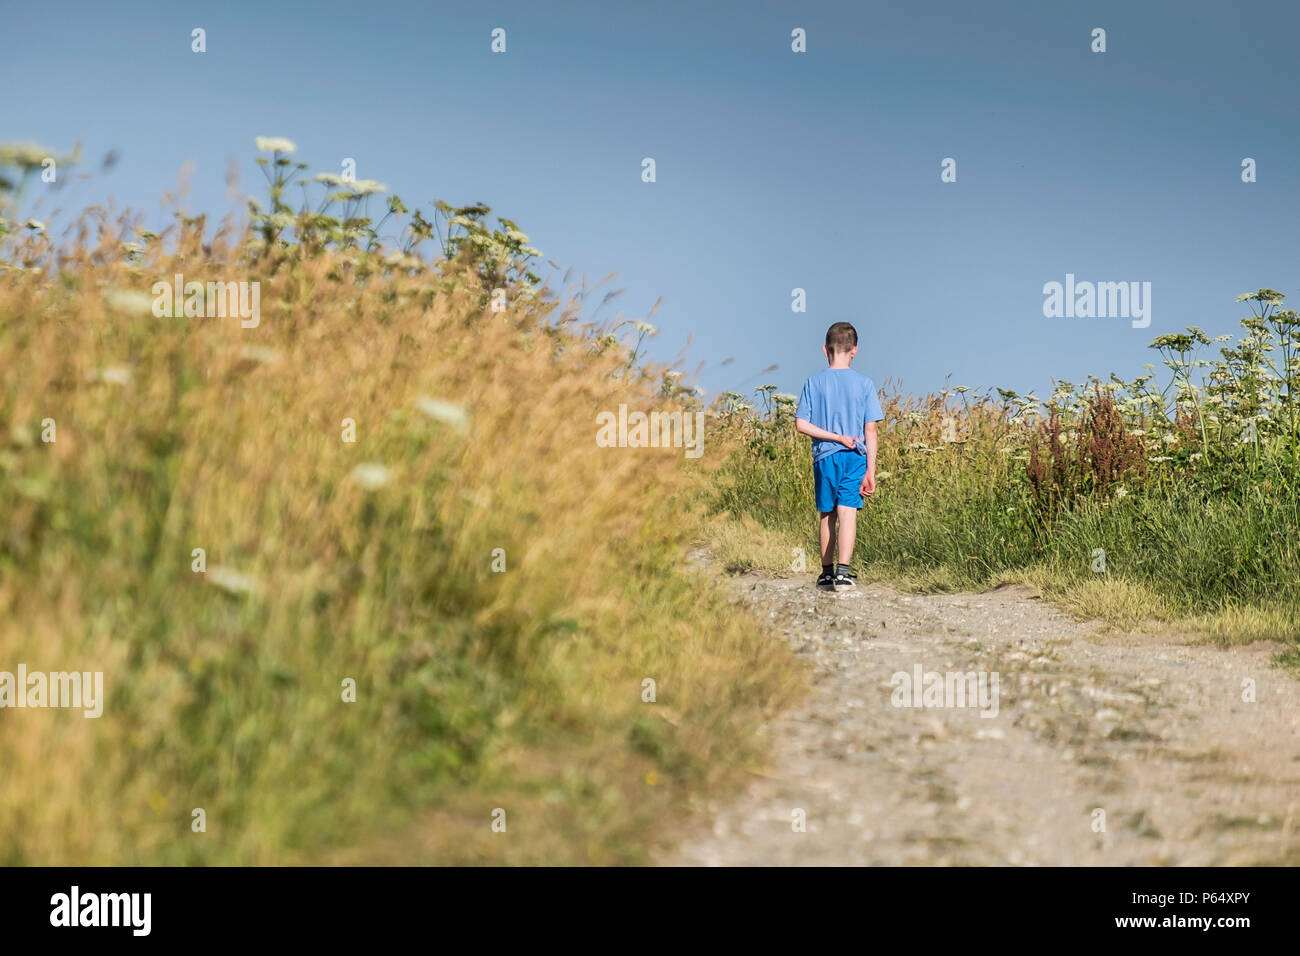 A young boy walking alone along a track in a field. Stock Photo